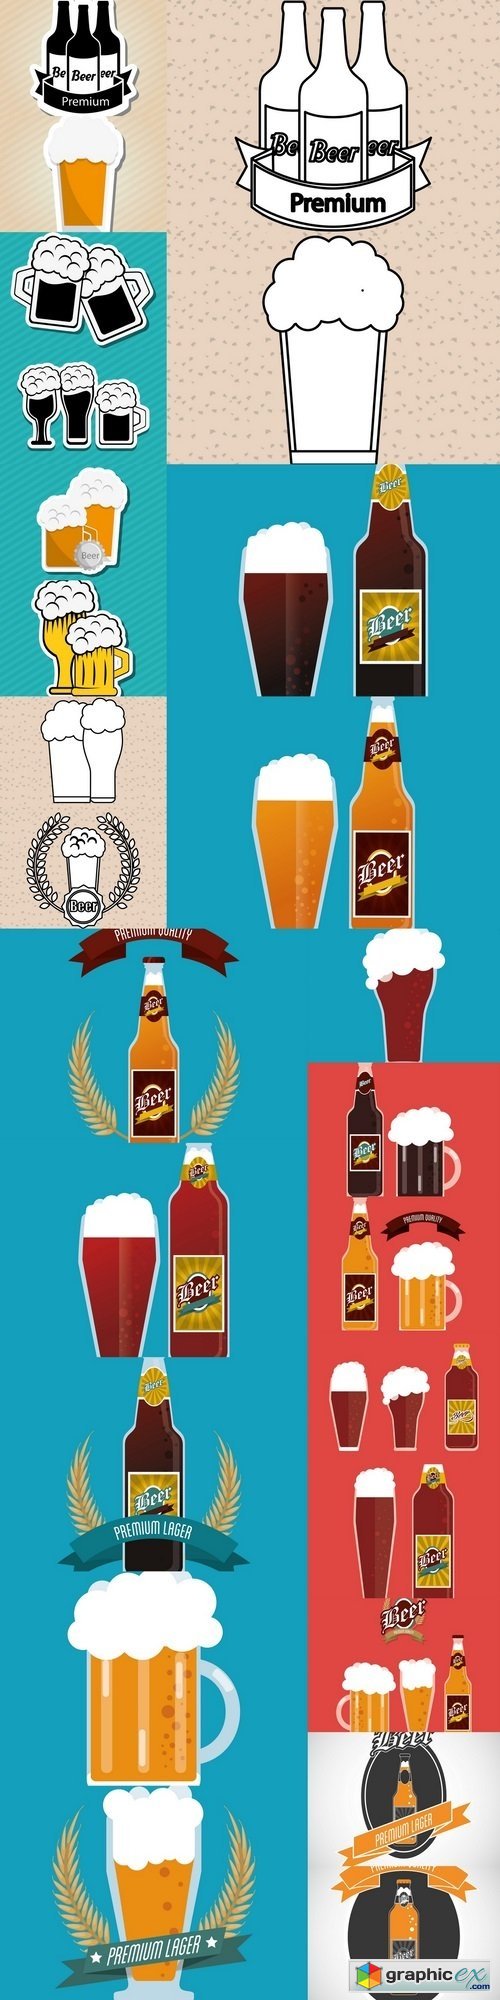 Beer icon design